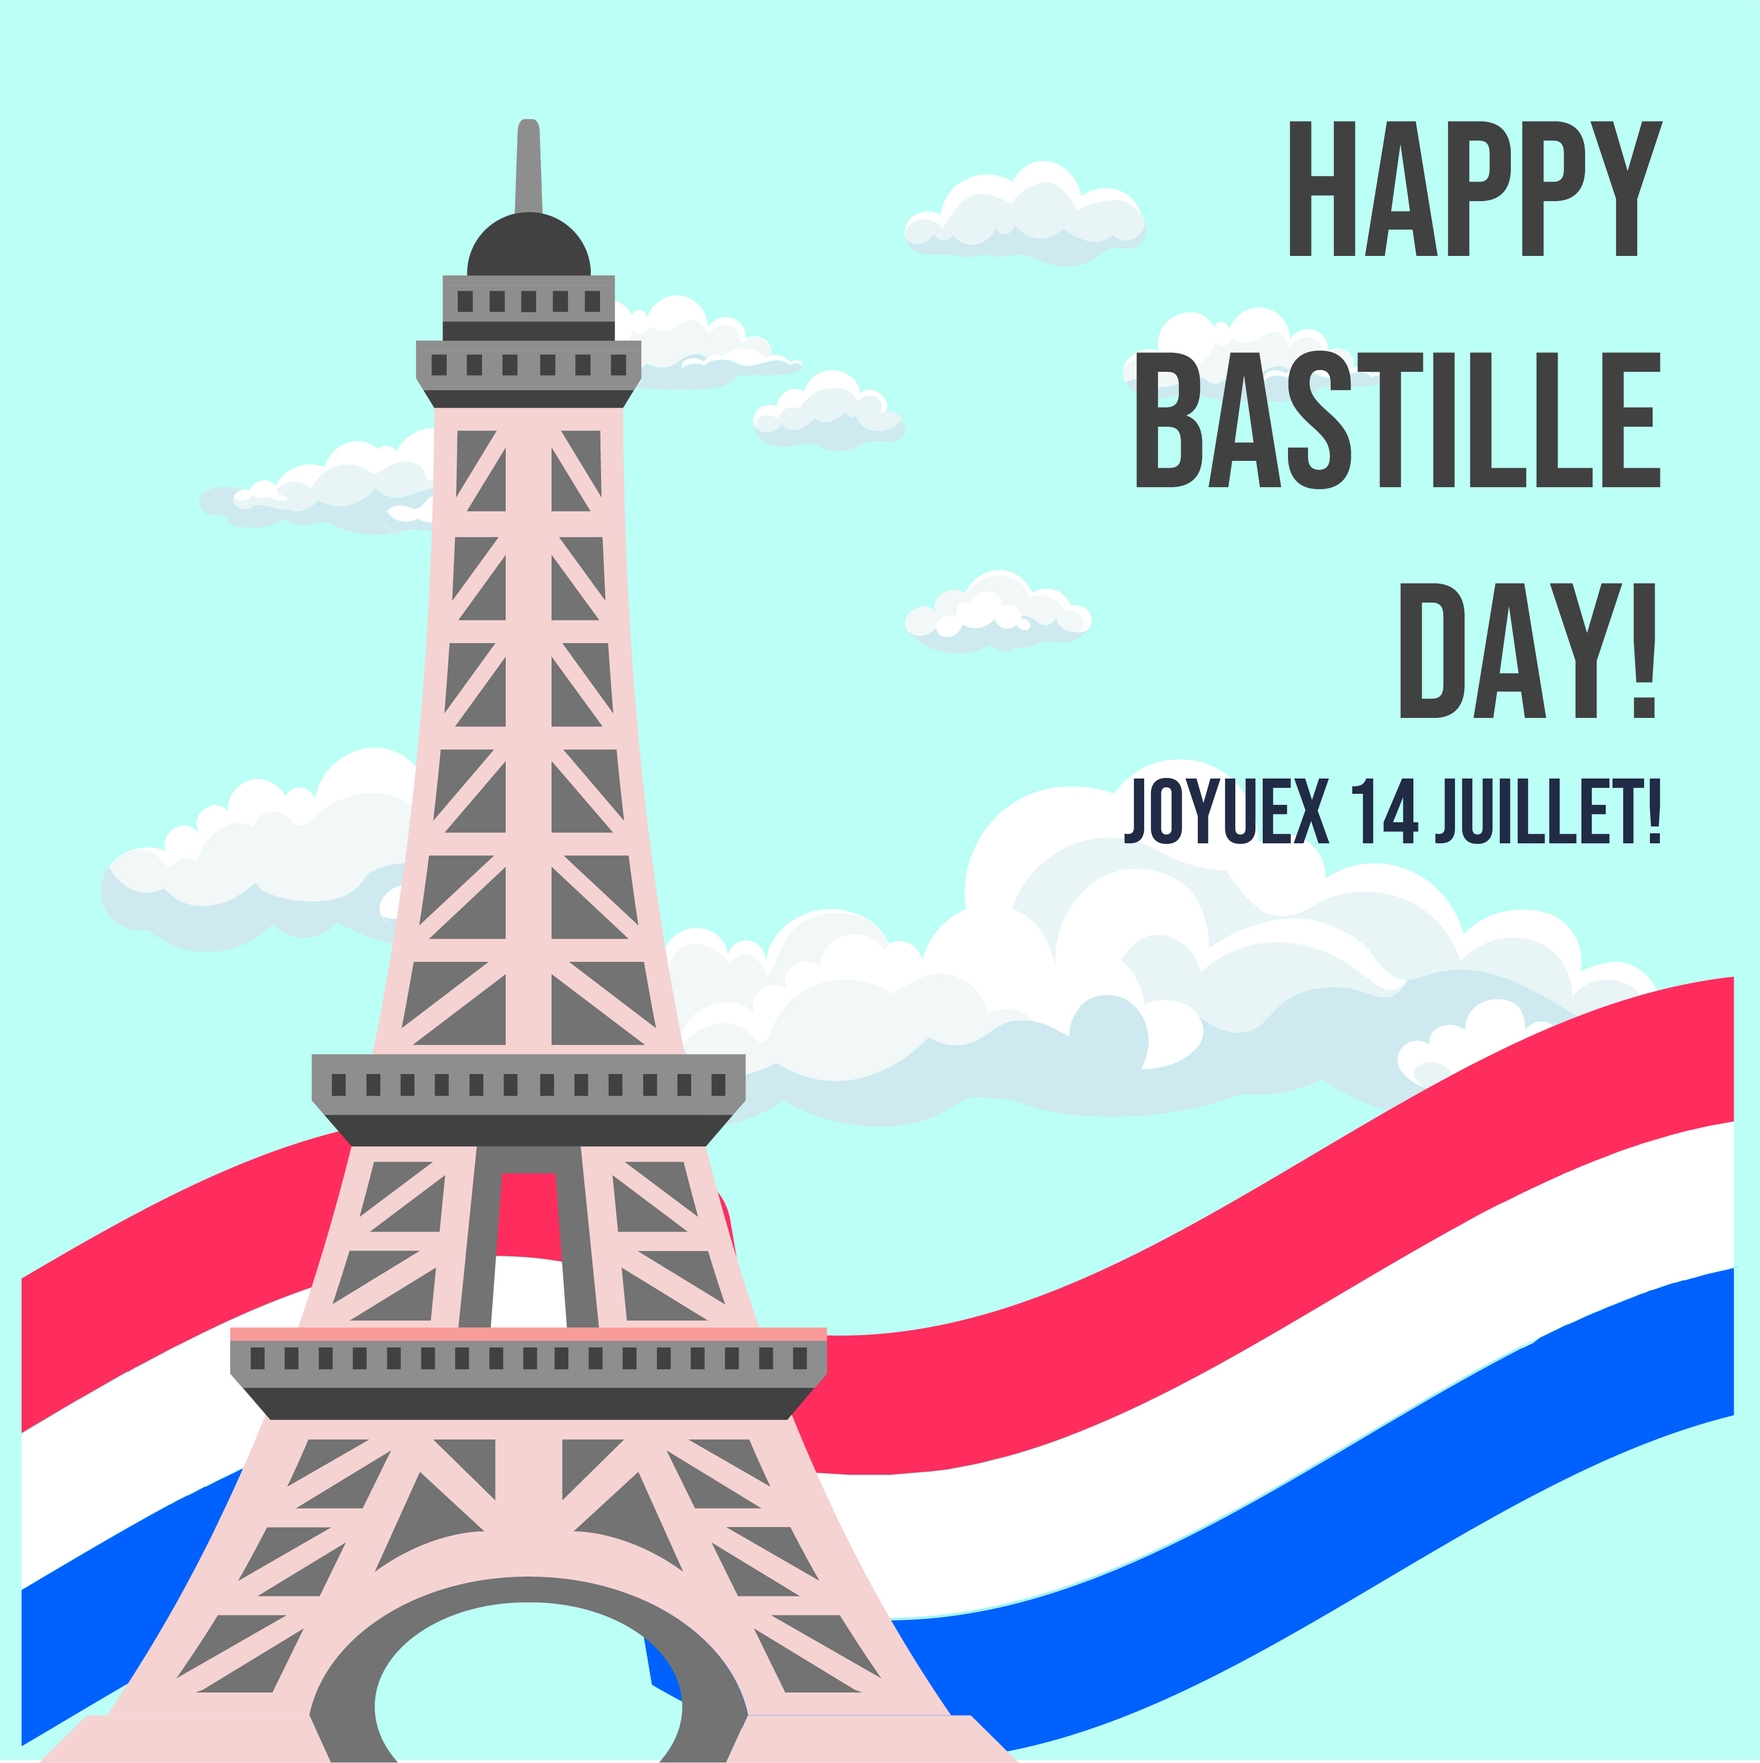 Free Bastille Day Wishes Vector